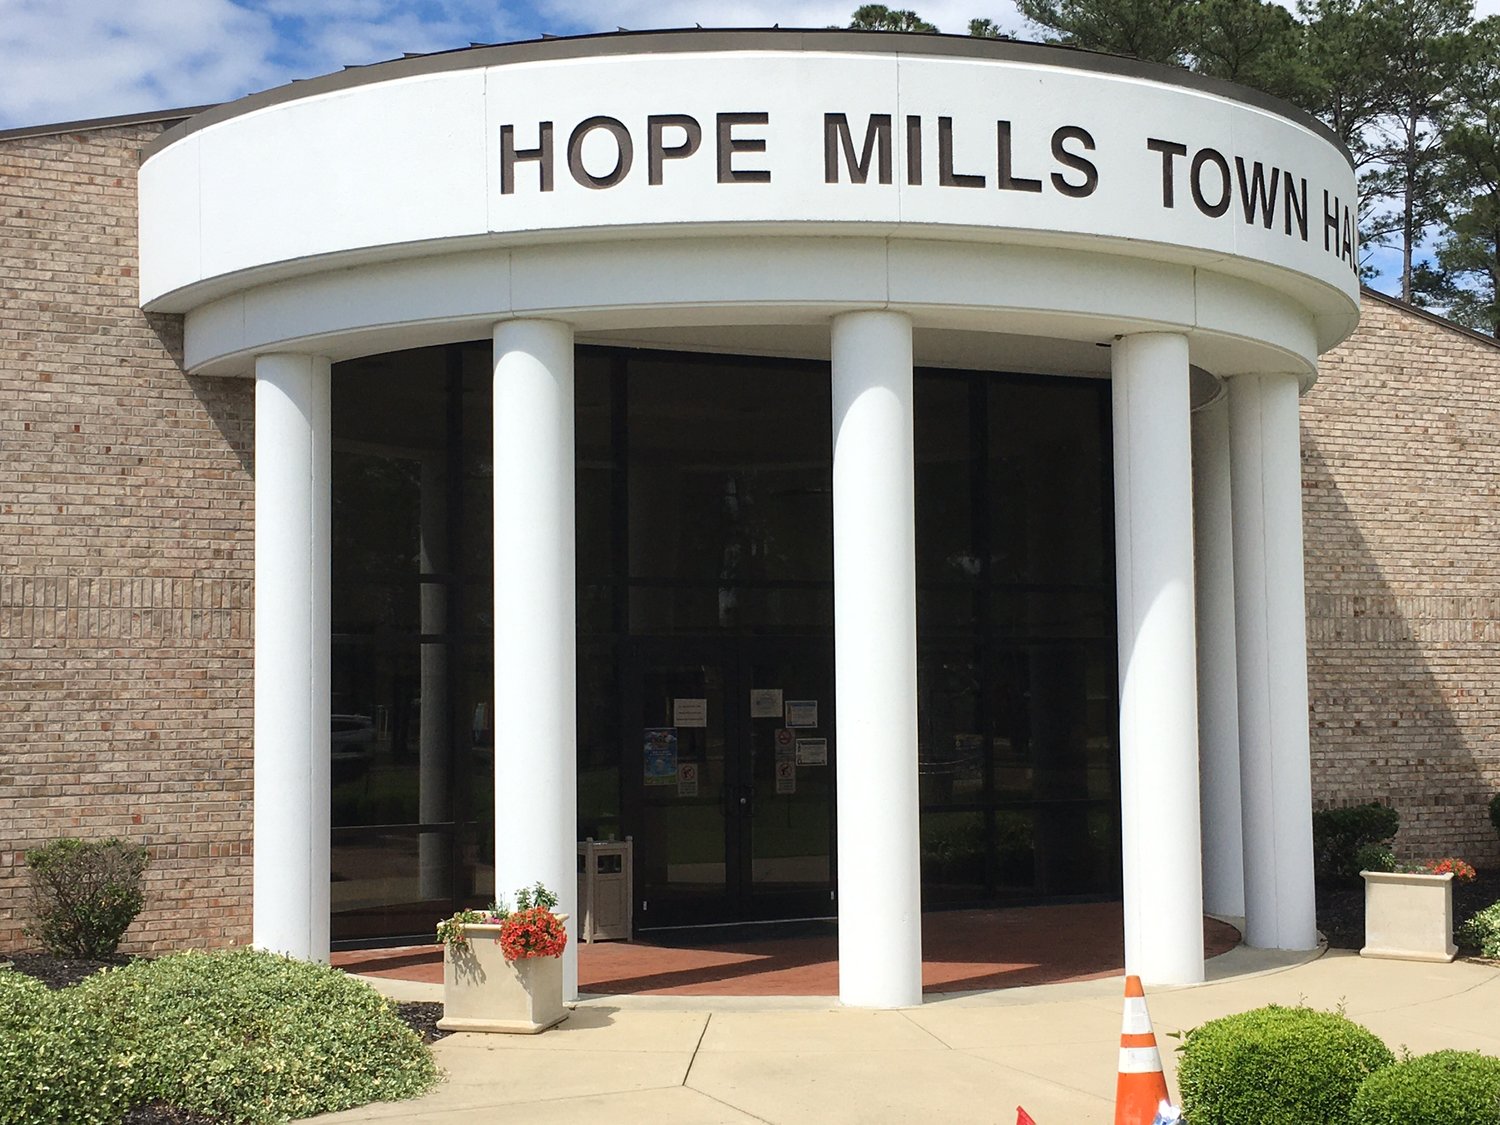 On Monday night, the Hope Mills Board of Commissioners agreed to place a temporary moratorium on certain businesses while the town’s staff works to create an overlay district.